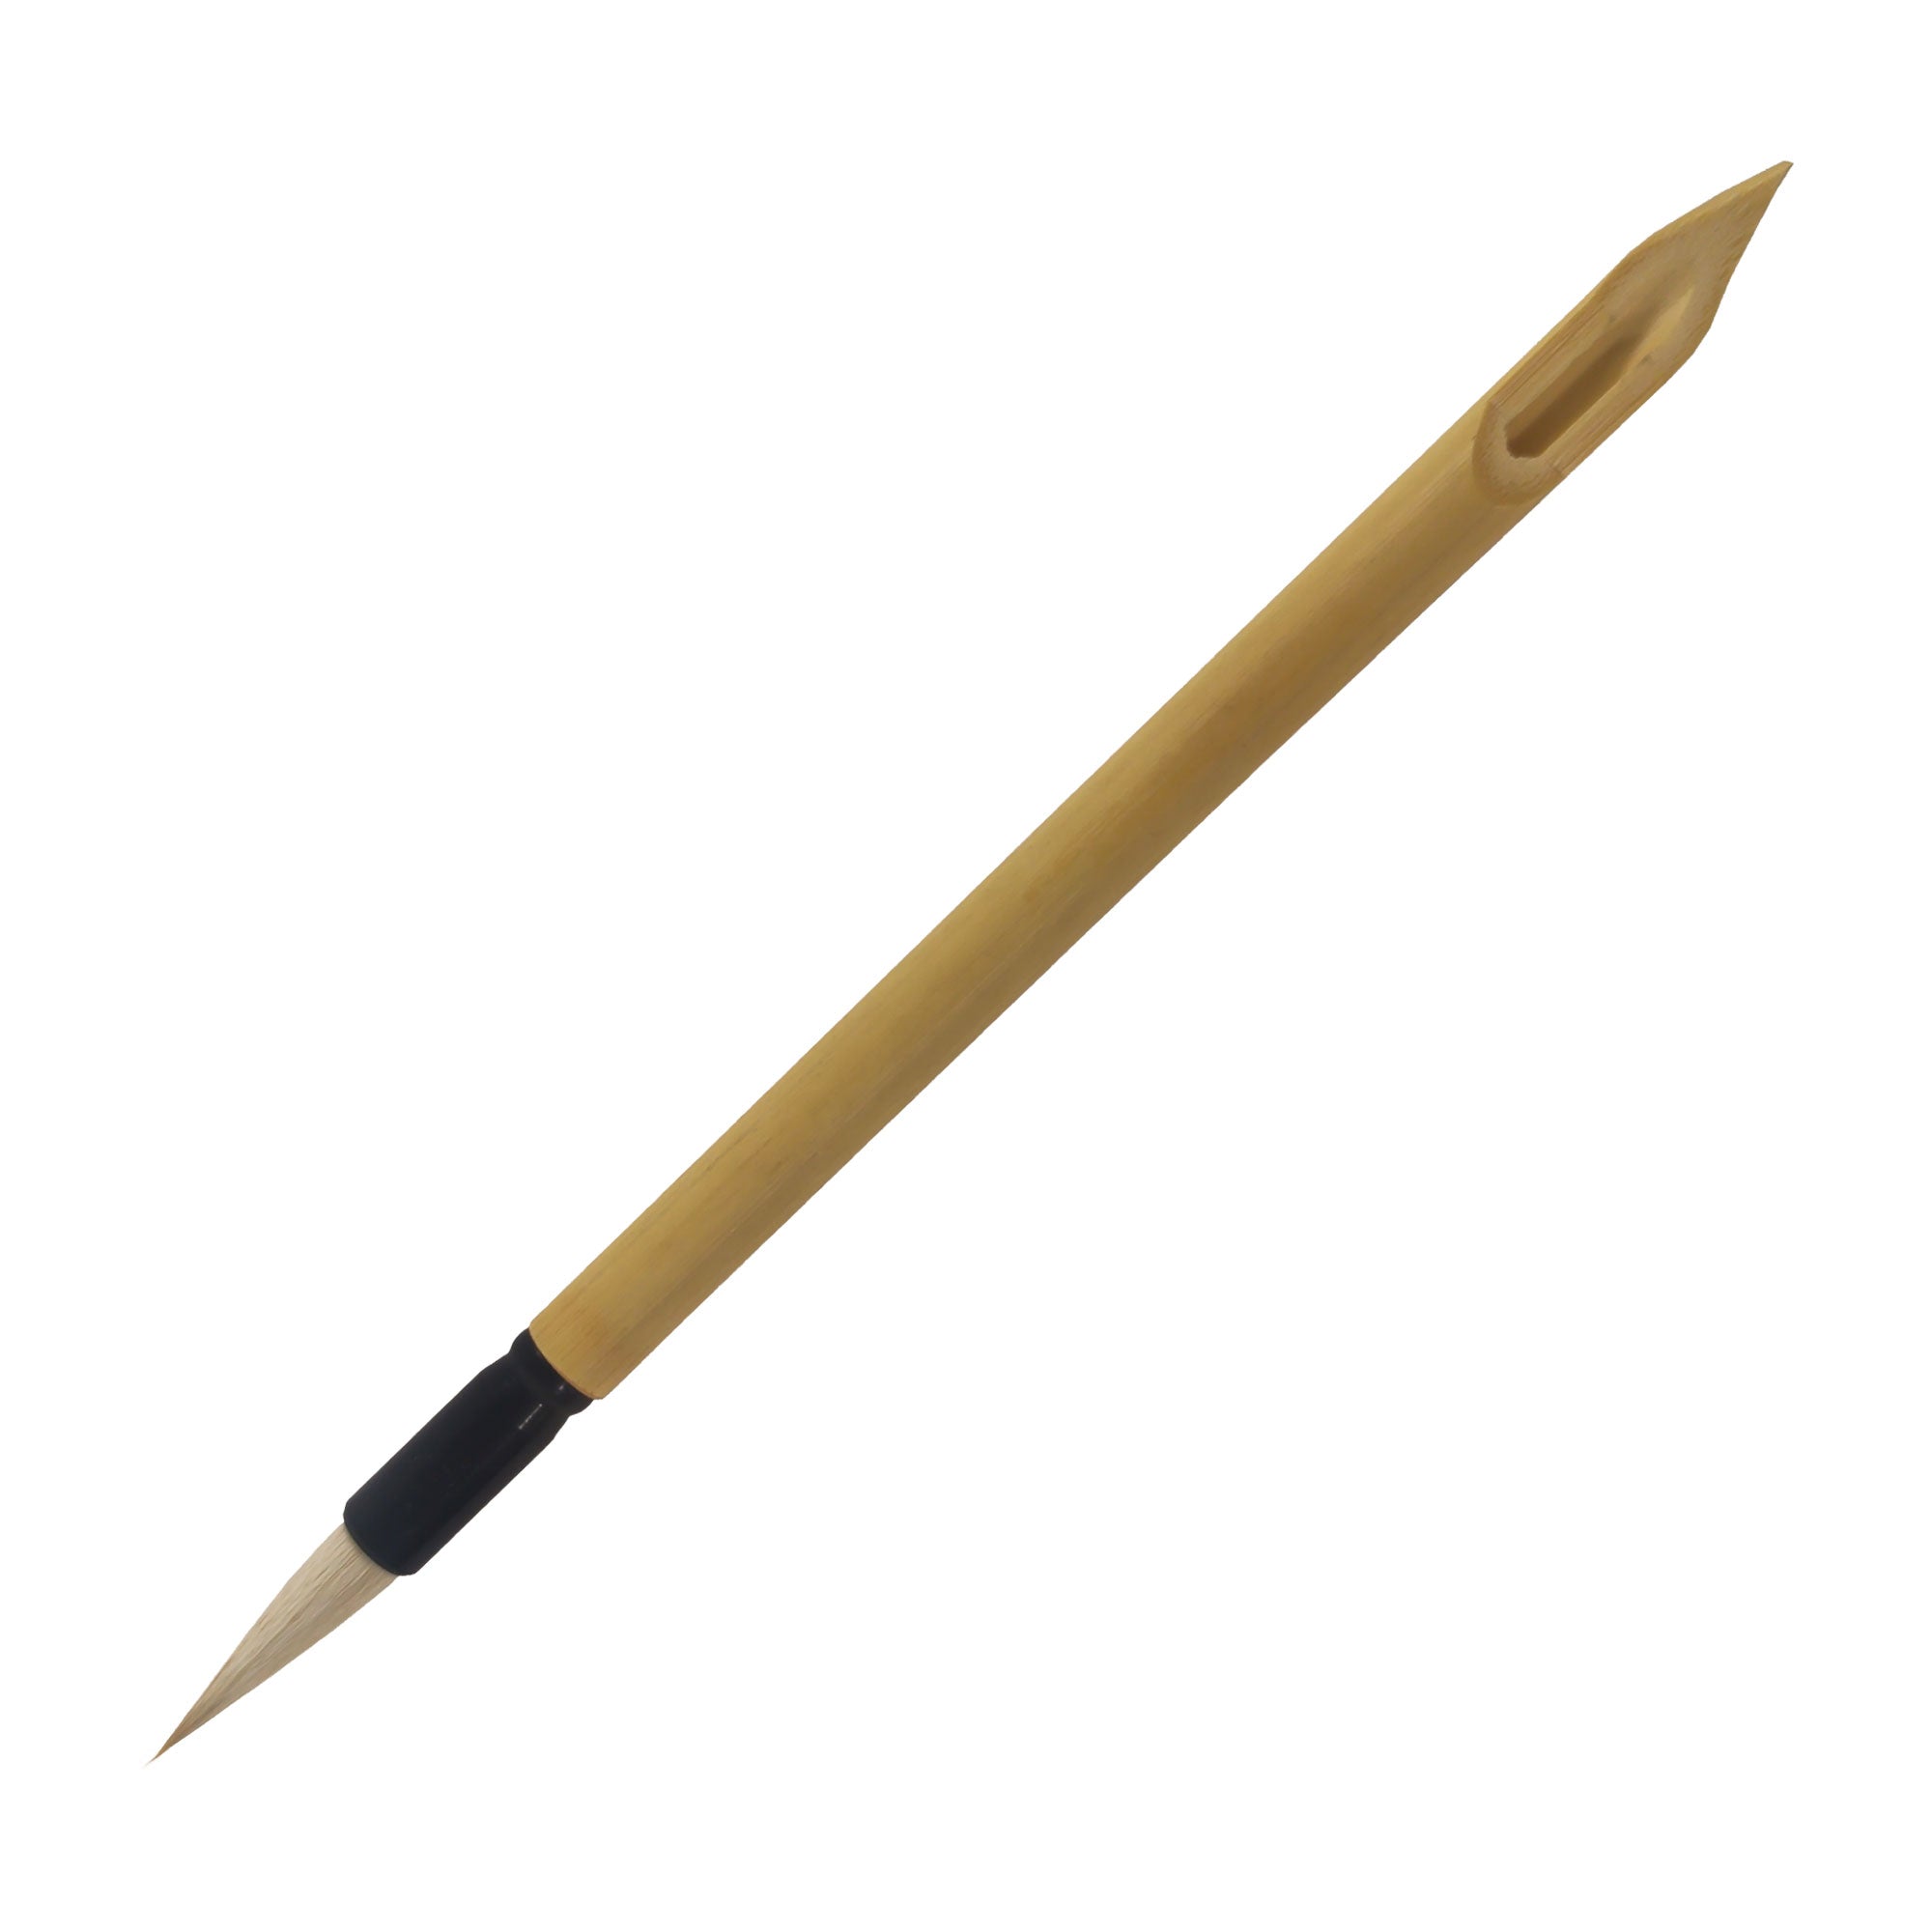 Loxley Bamboo Dip Pen with Brush - Small